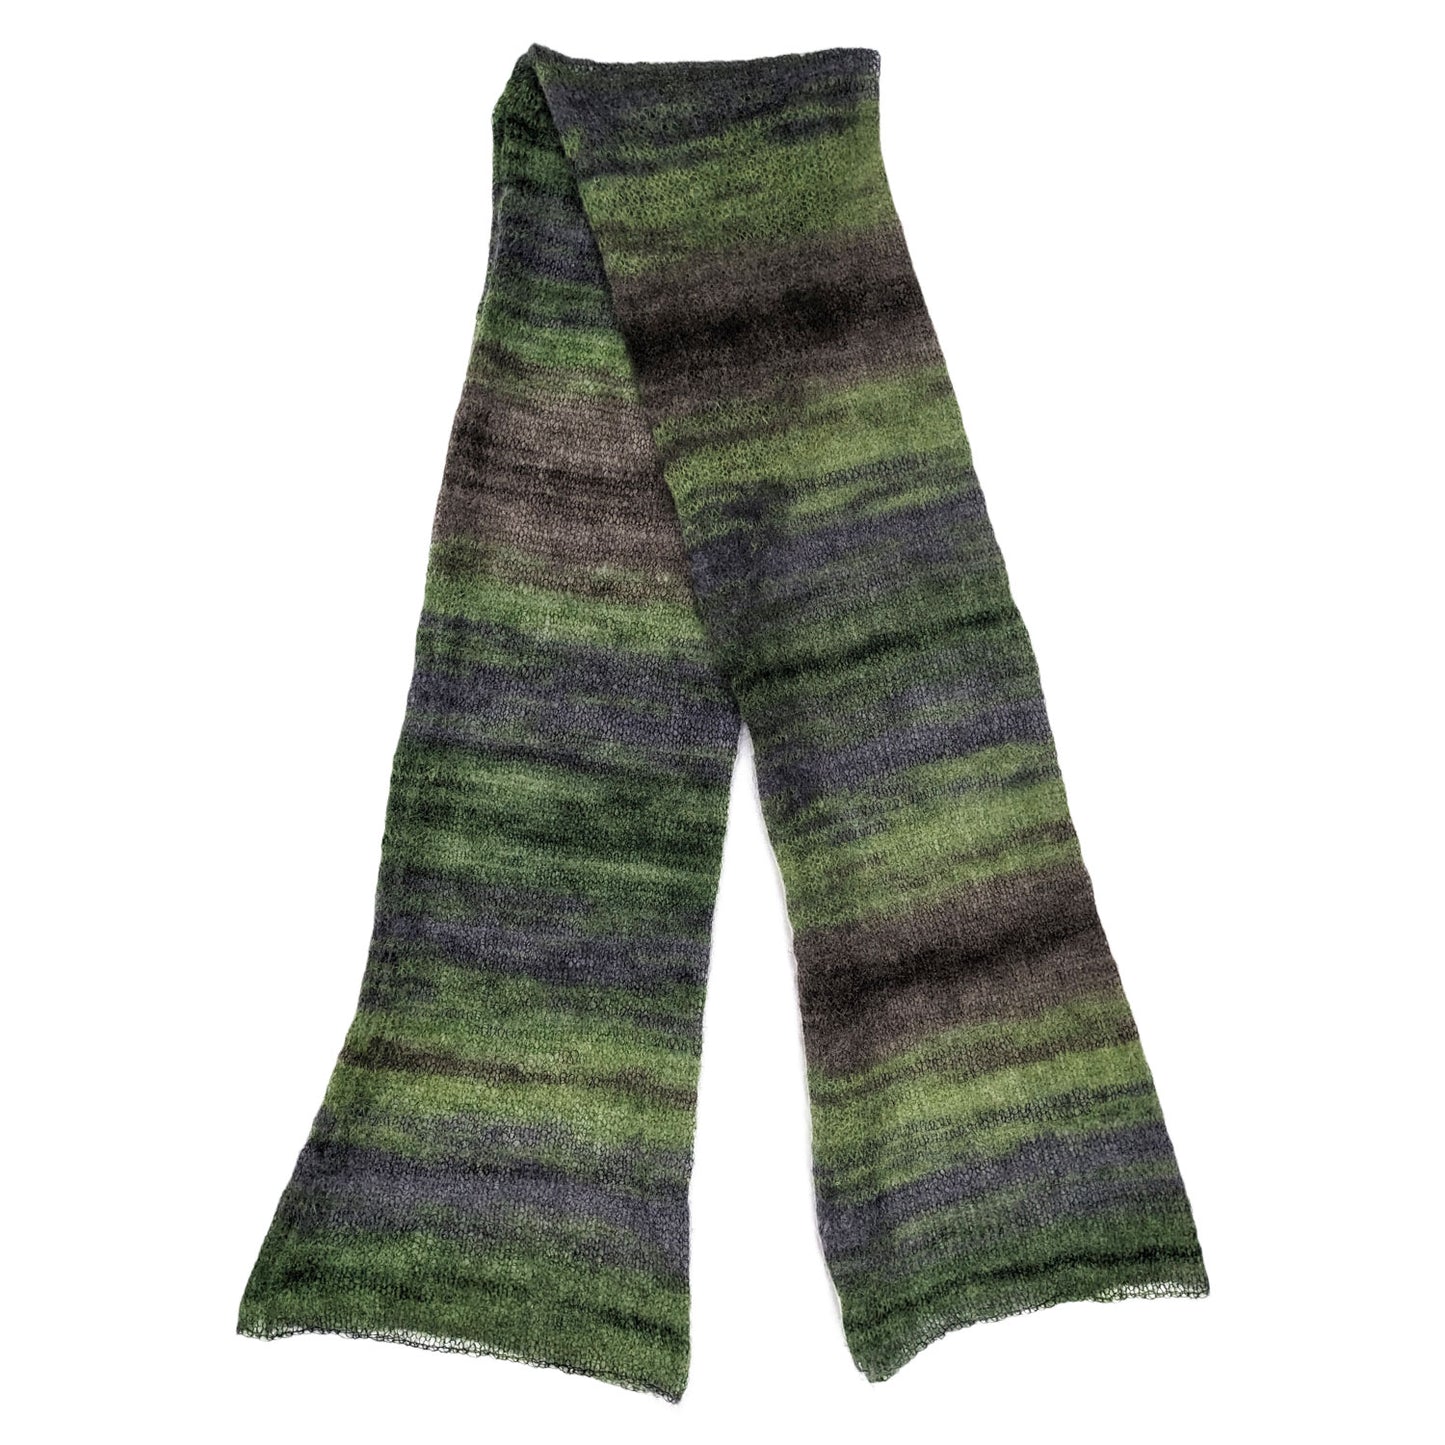 Spring Gradient Mohair Scarf - Mykes Lab